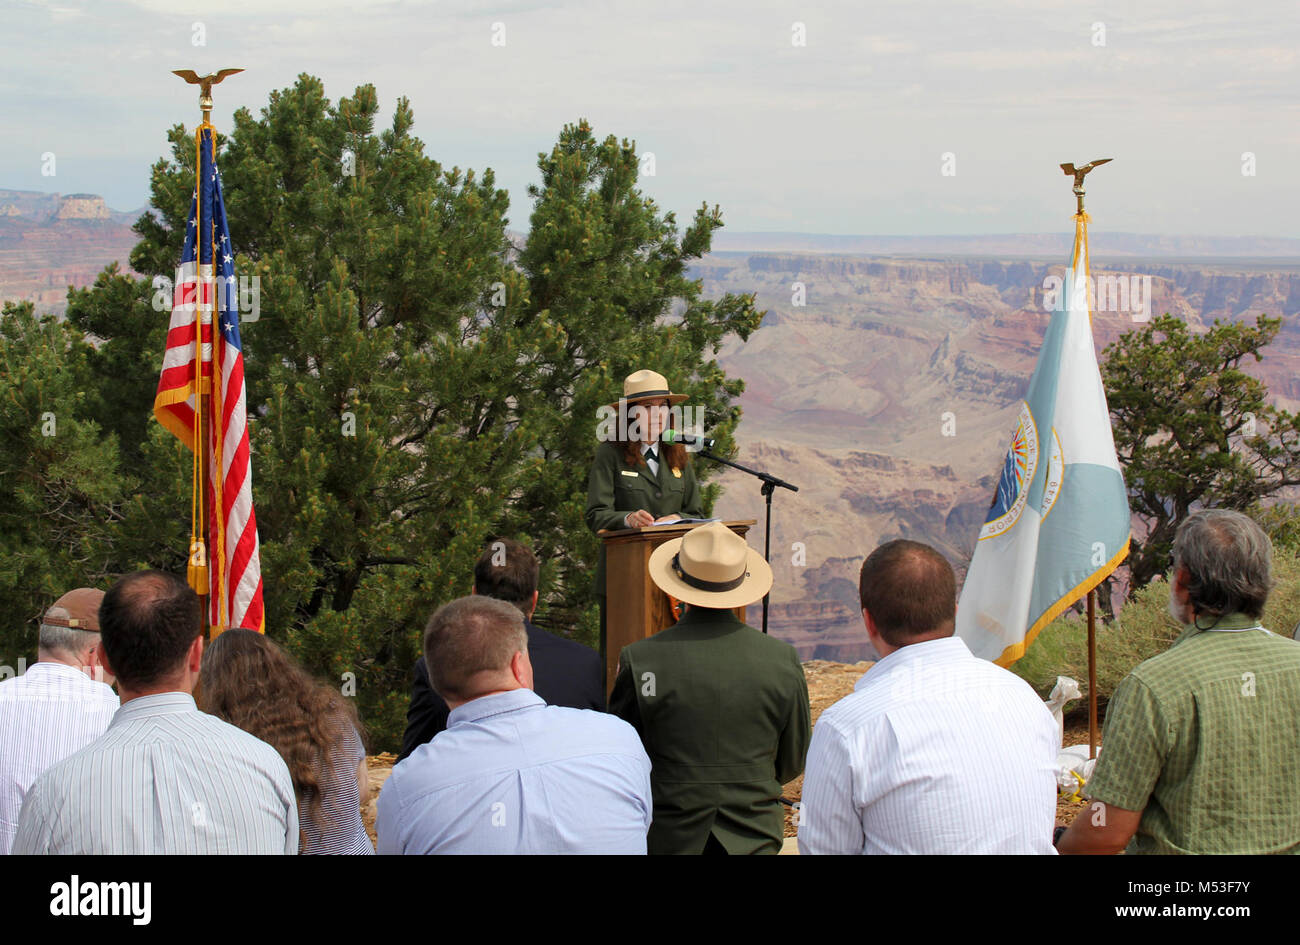 1956 Grand Canyon TWA-United Airlines Aviation Accident Site National Historic. Laura Joss, Deputy Regional Director, Intermountain Region, National Park Service, speaking at the dedication ceremony. .  On Tuesday, July 8, 2014, the National Park Service (NPS) dedicated one of the nation’s newest National Historic Landmarks, the 1956 Grand Canyon TWA-United Airlines Aviation Accident Site in Grand Canyon National Park. This site commemorates a horrific airline collision over the Grand Canyon in 1956.   The public dedication ceremony of the National Historic Landmark designation took place at t Stock Photo